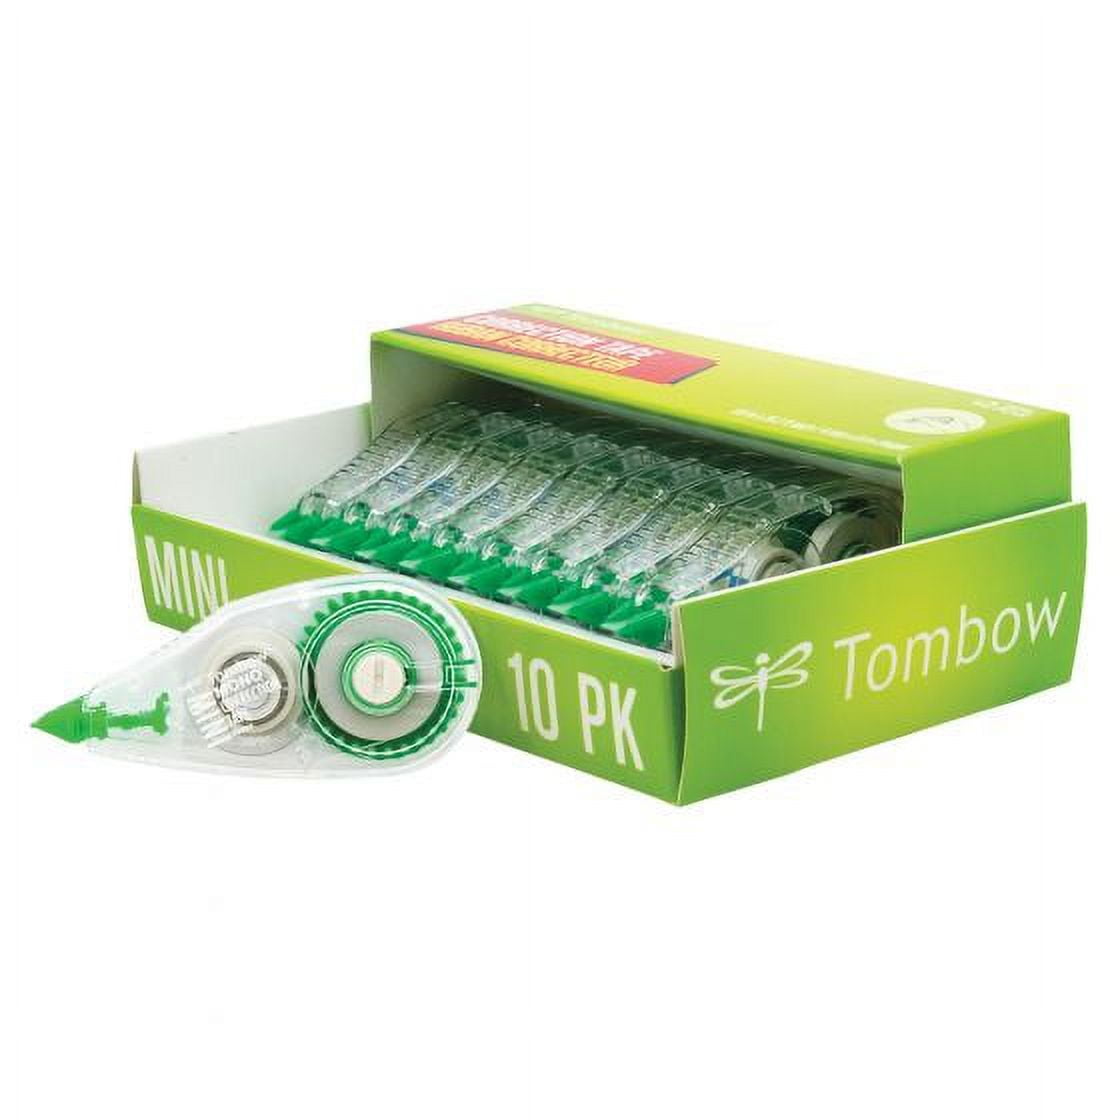 Tombow Single-line Bright Dispnsr Correction Tapes - TOM68670